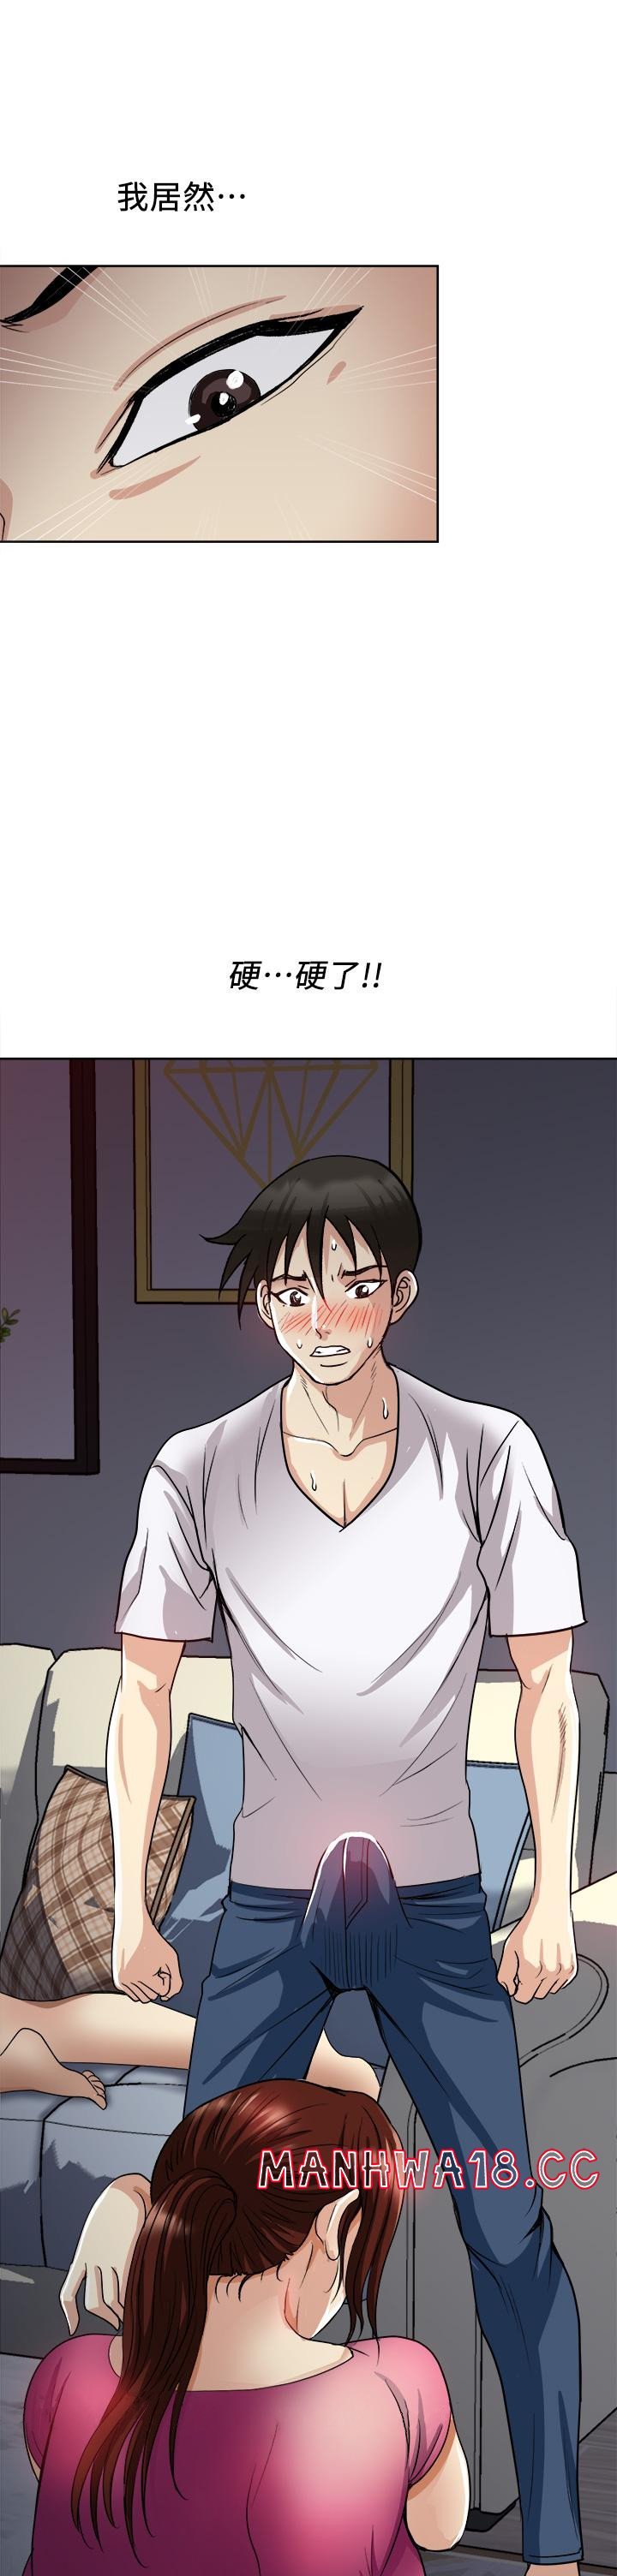 just-once-raw-chap-4-42